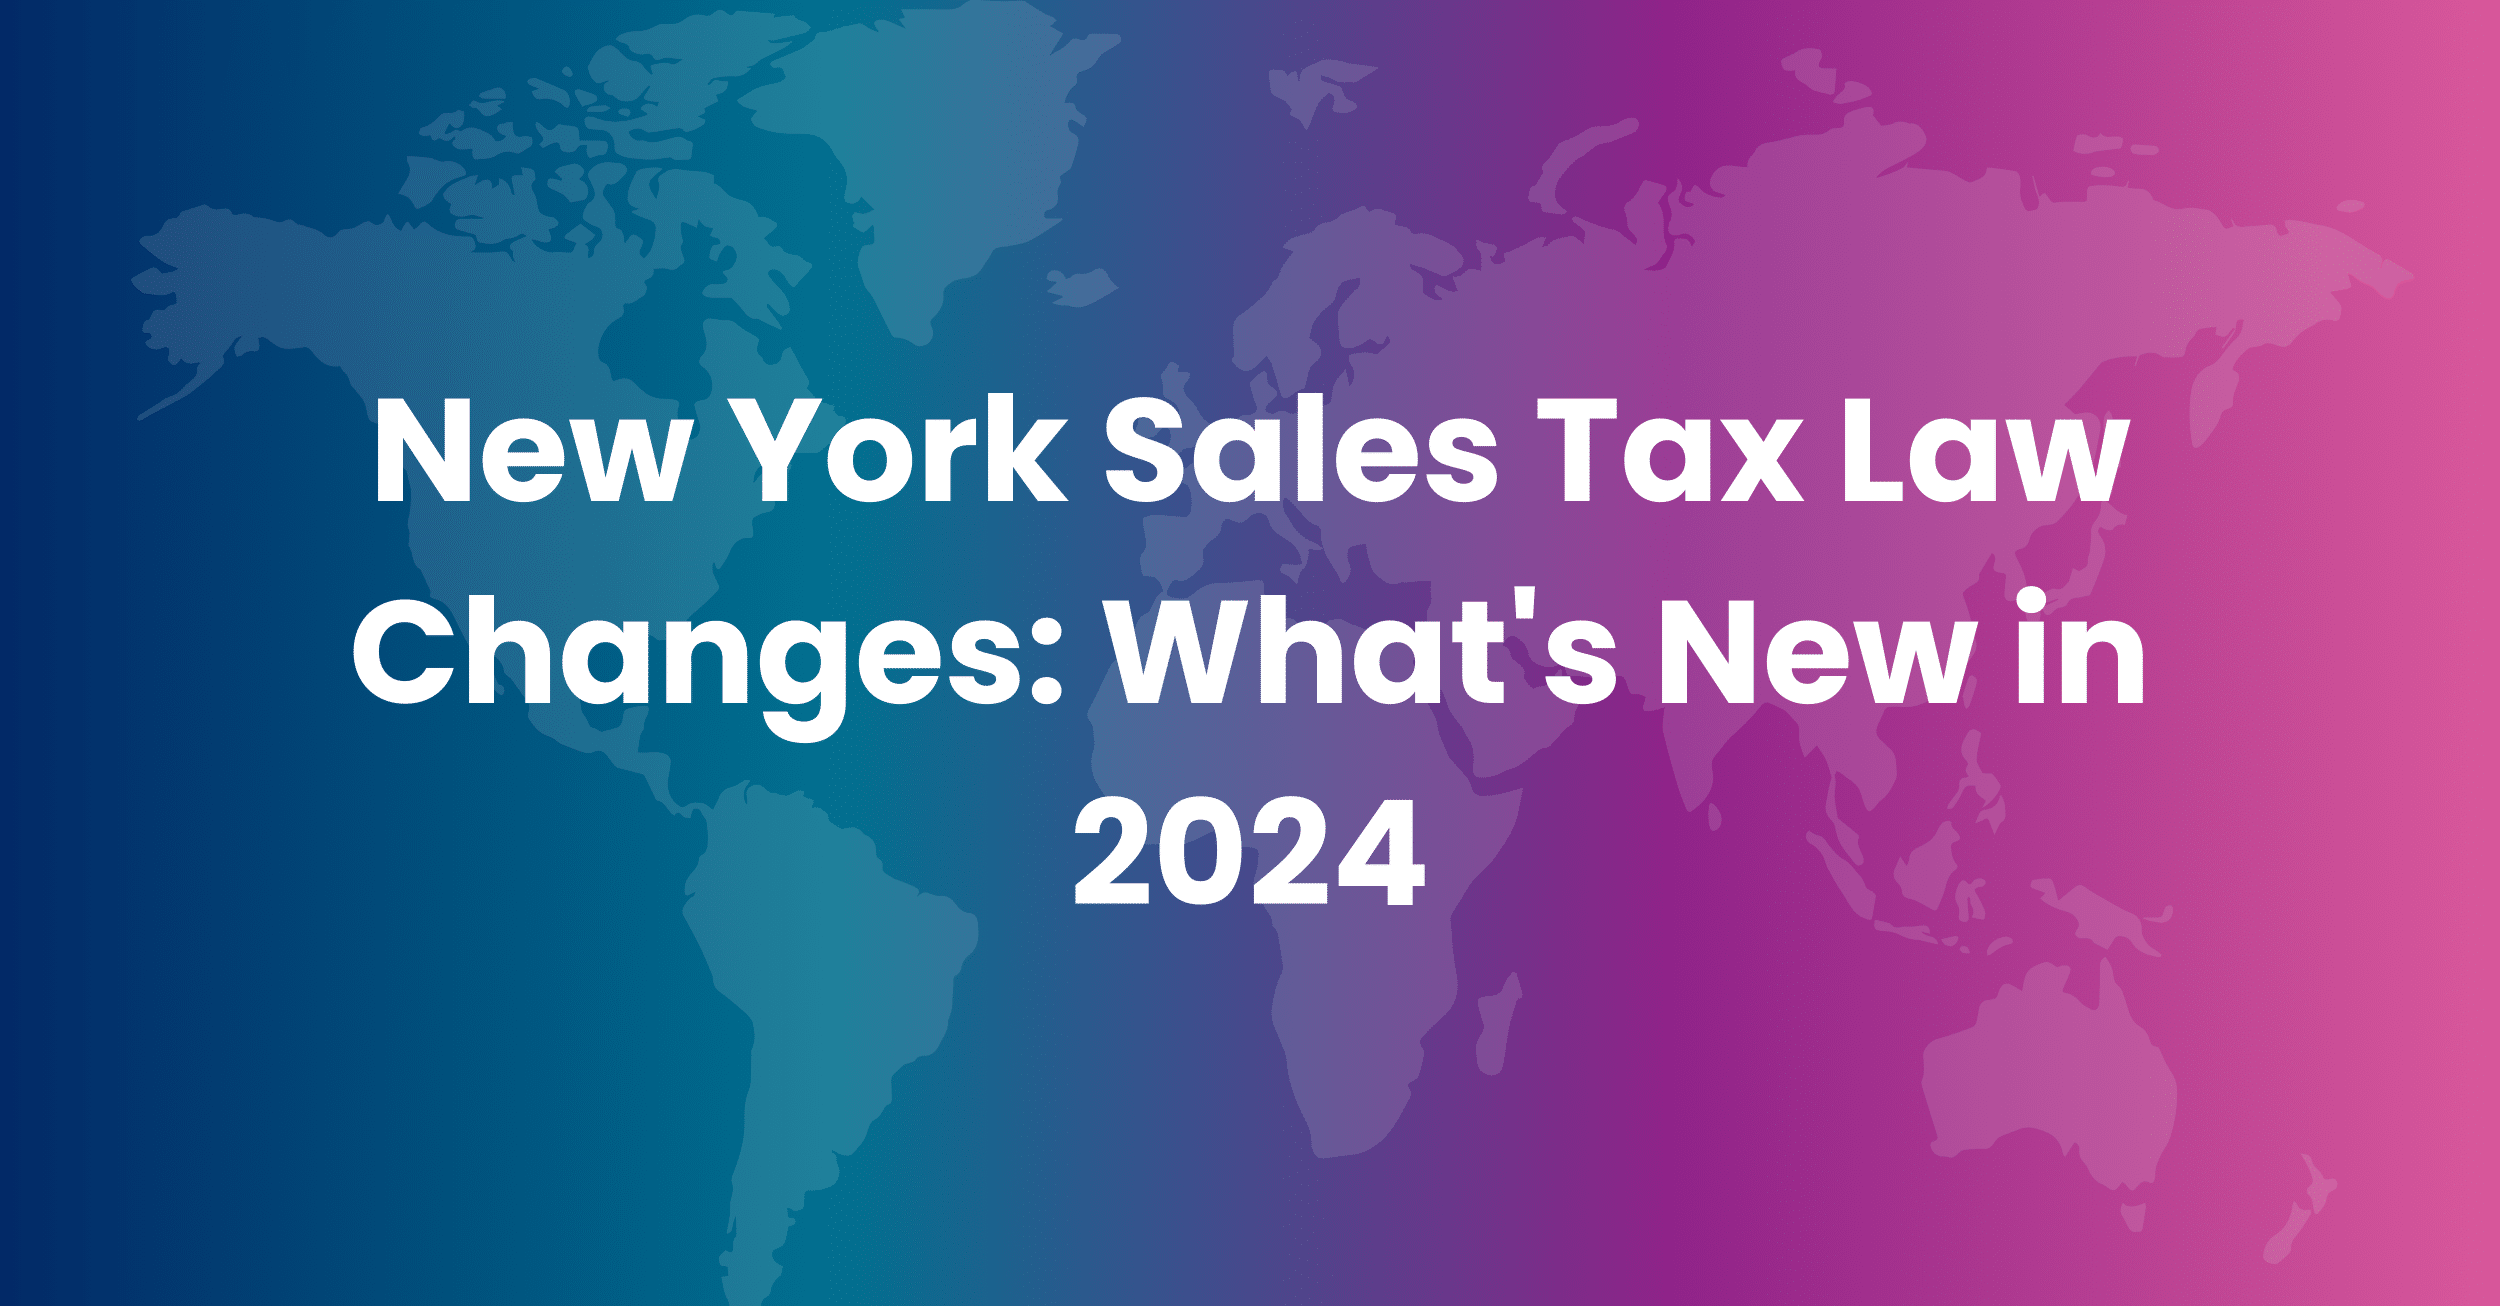 New York Sales Tax Law Changes: What’s New in 2024